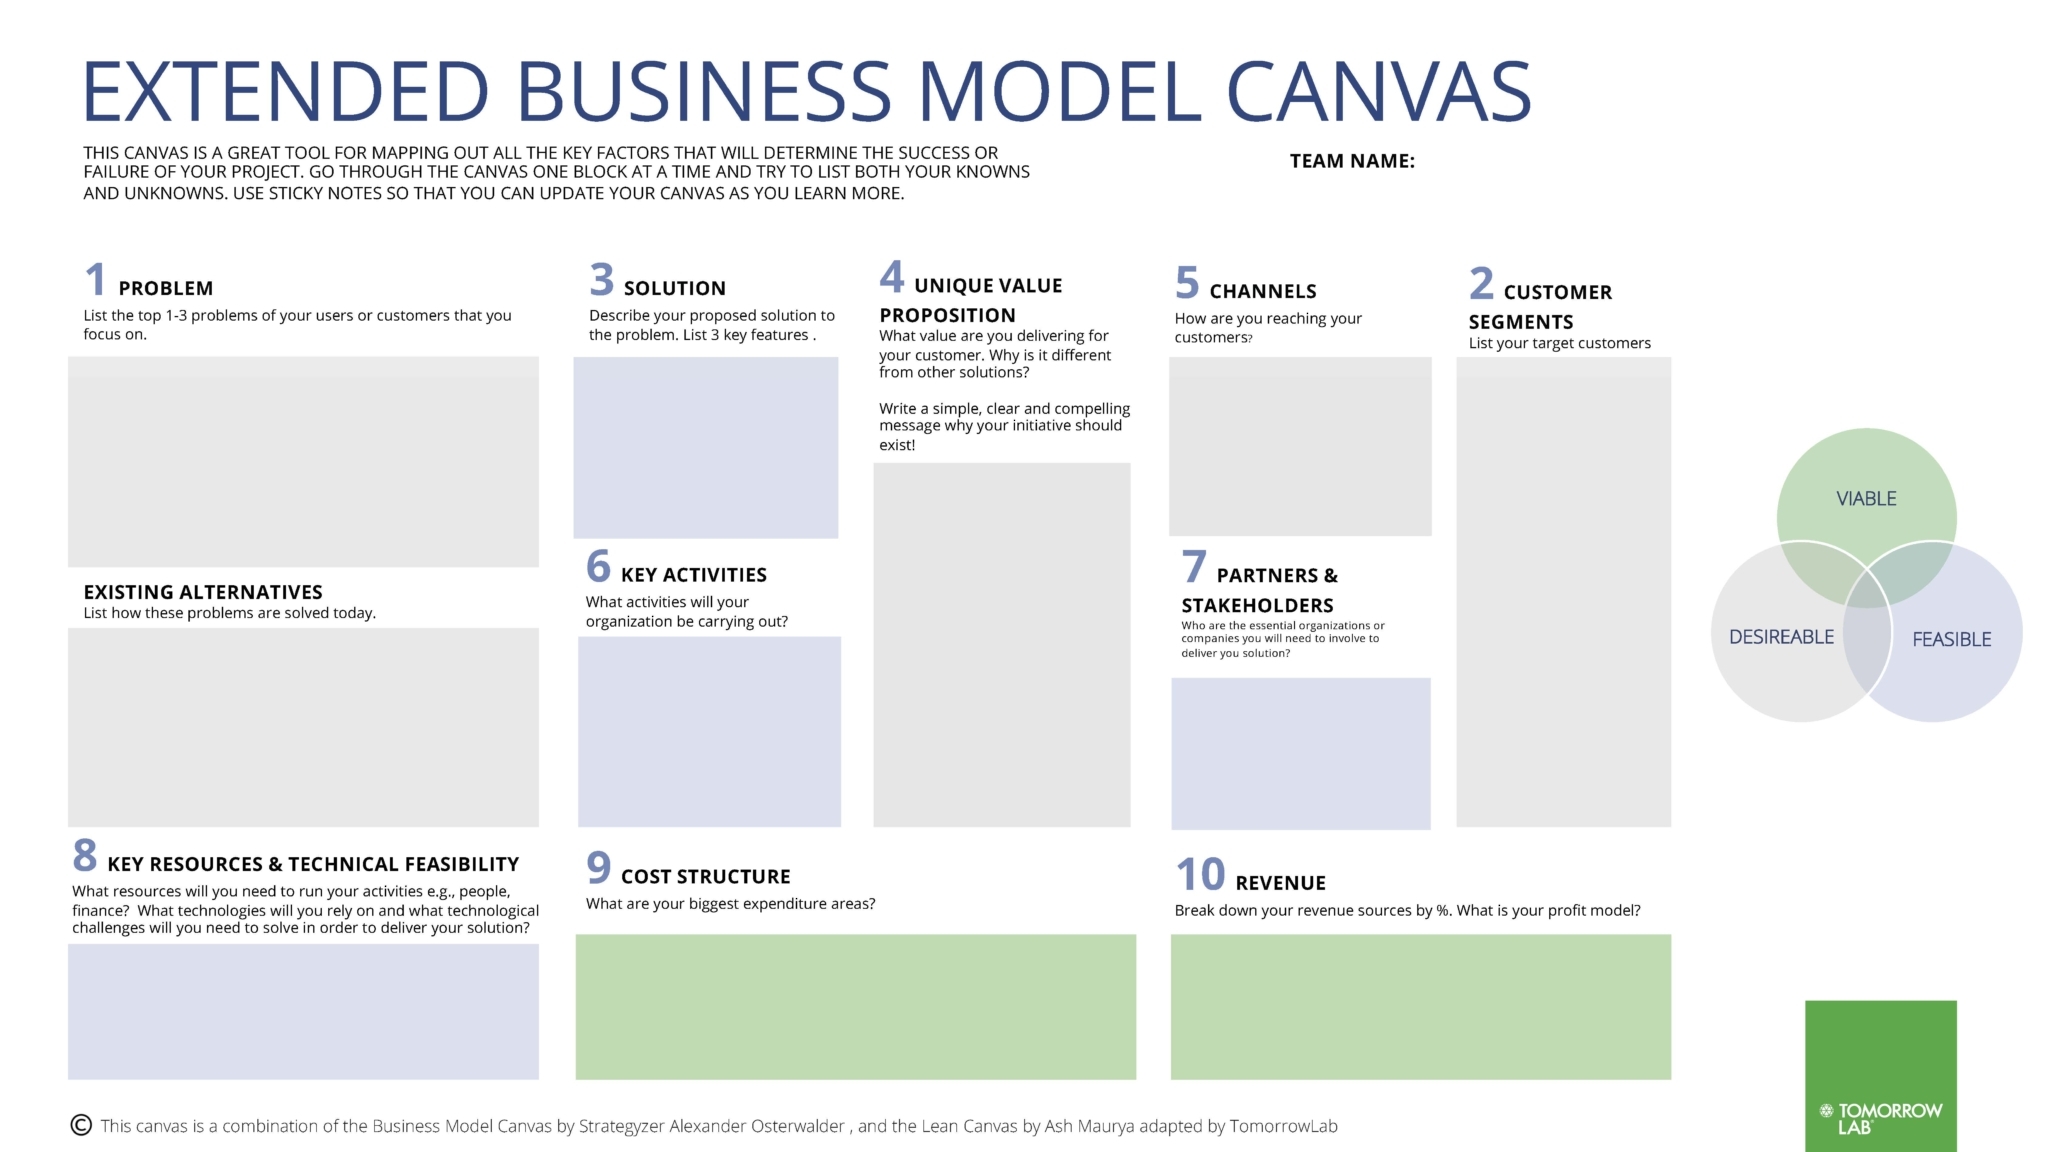 The extended business model canvas